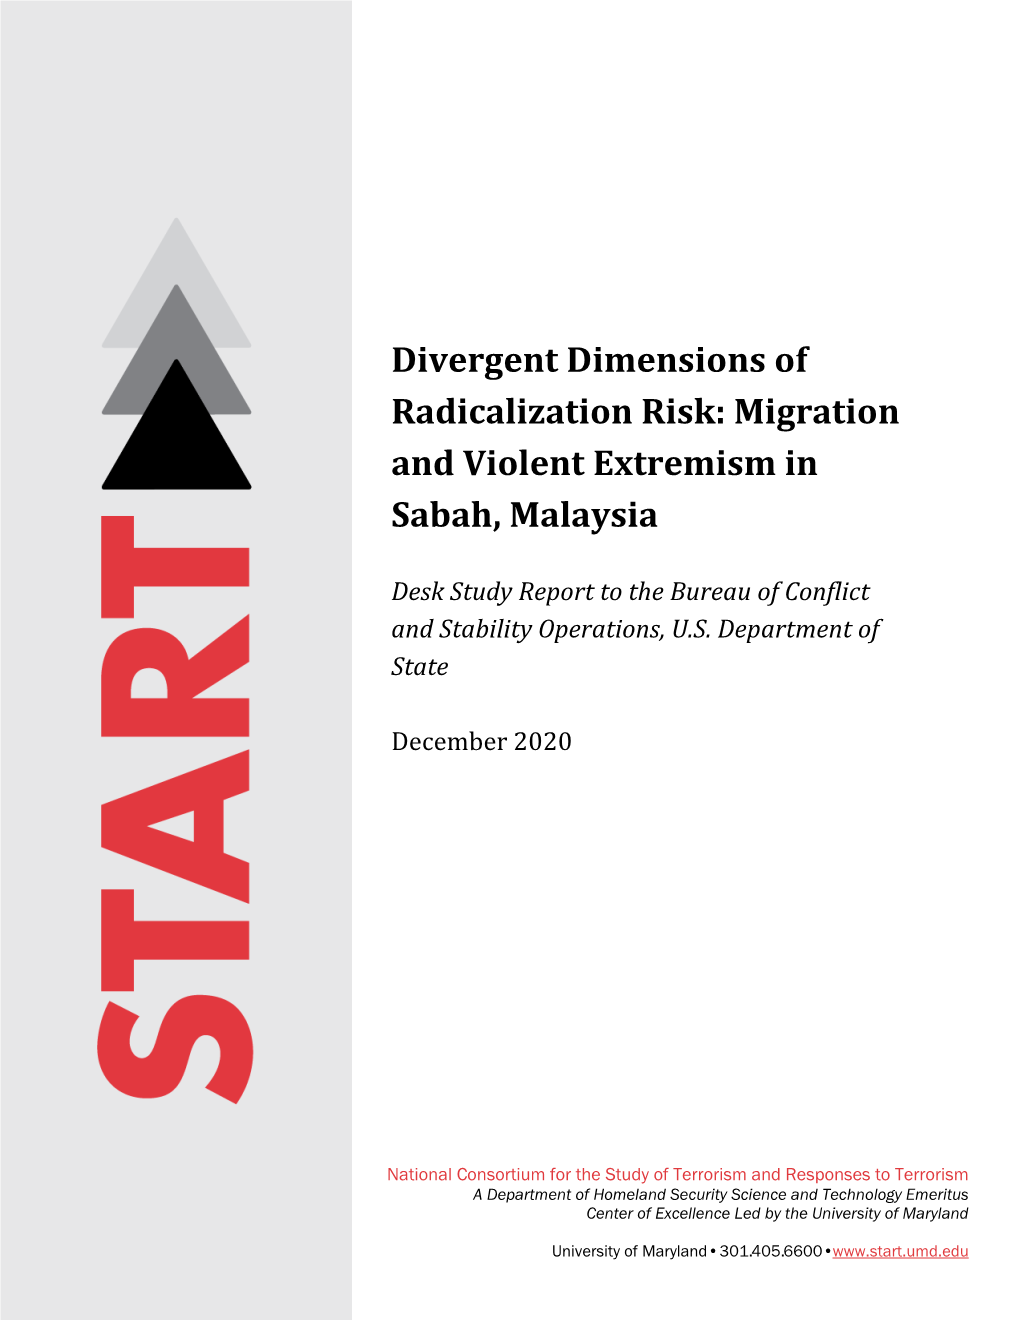 Migration and Violent Extremism in Sabah, Malaysia